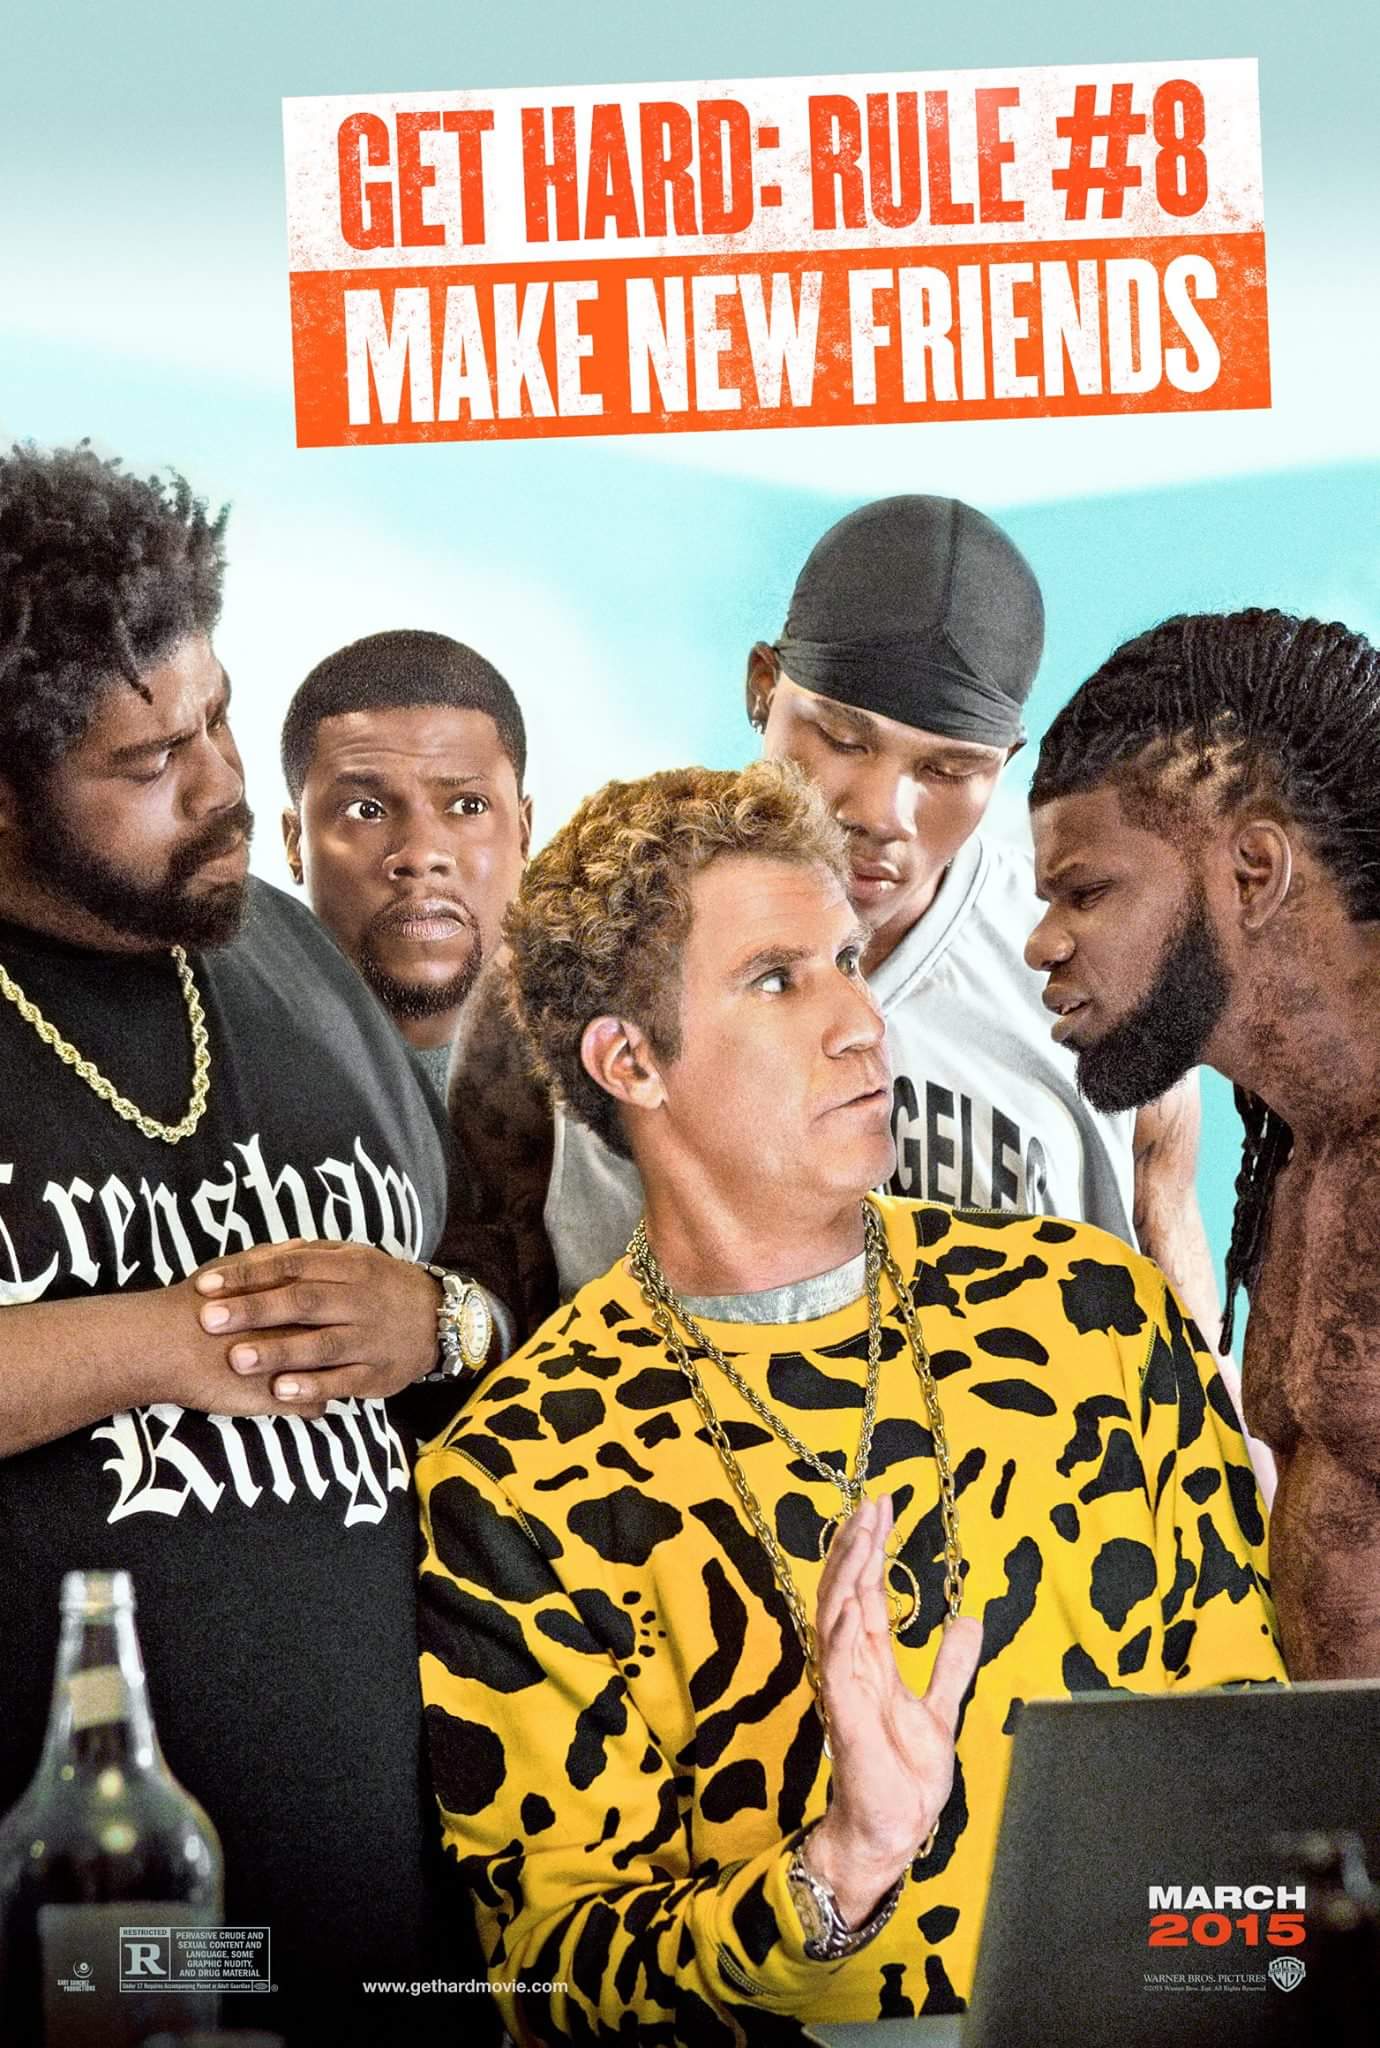 From the Cover of 'Get Hard'